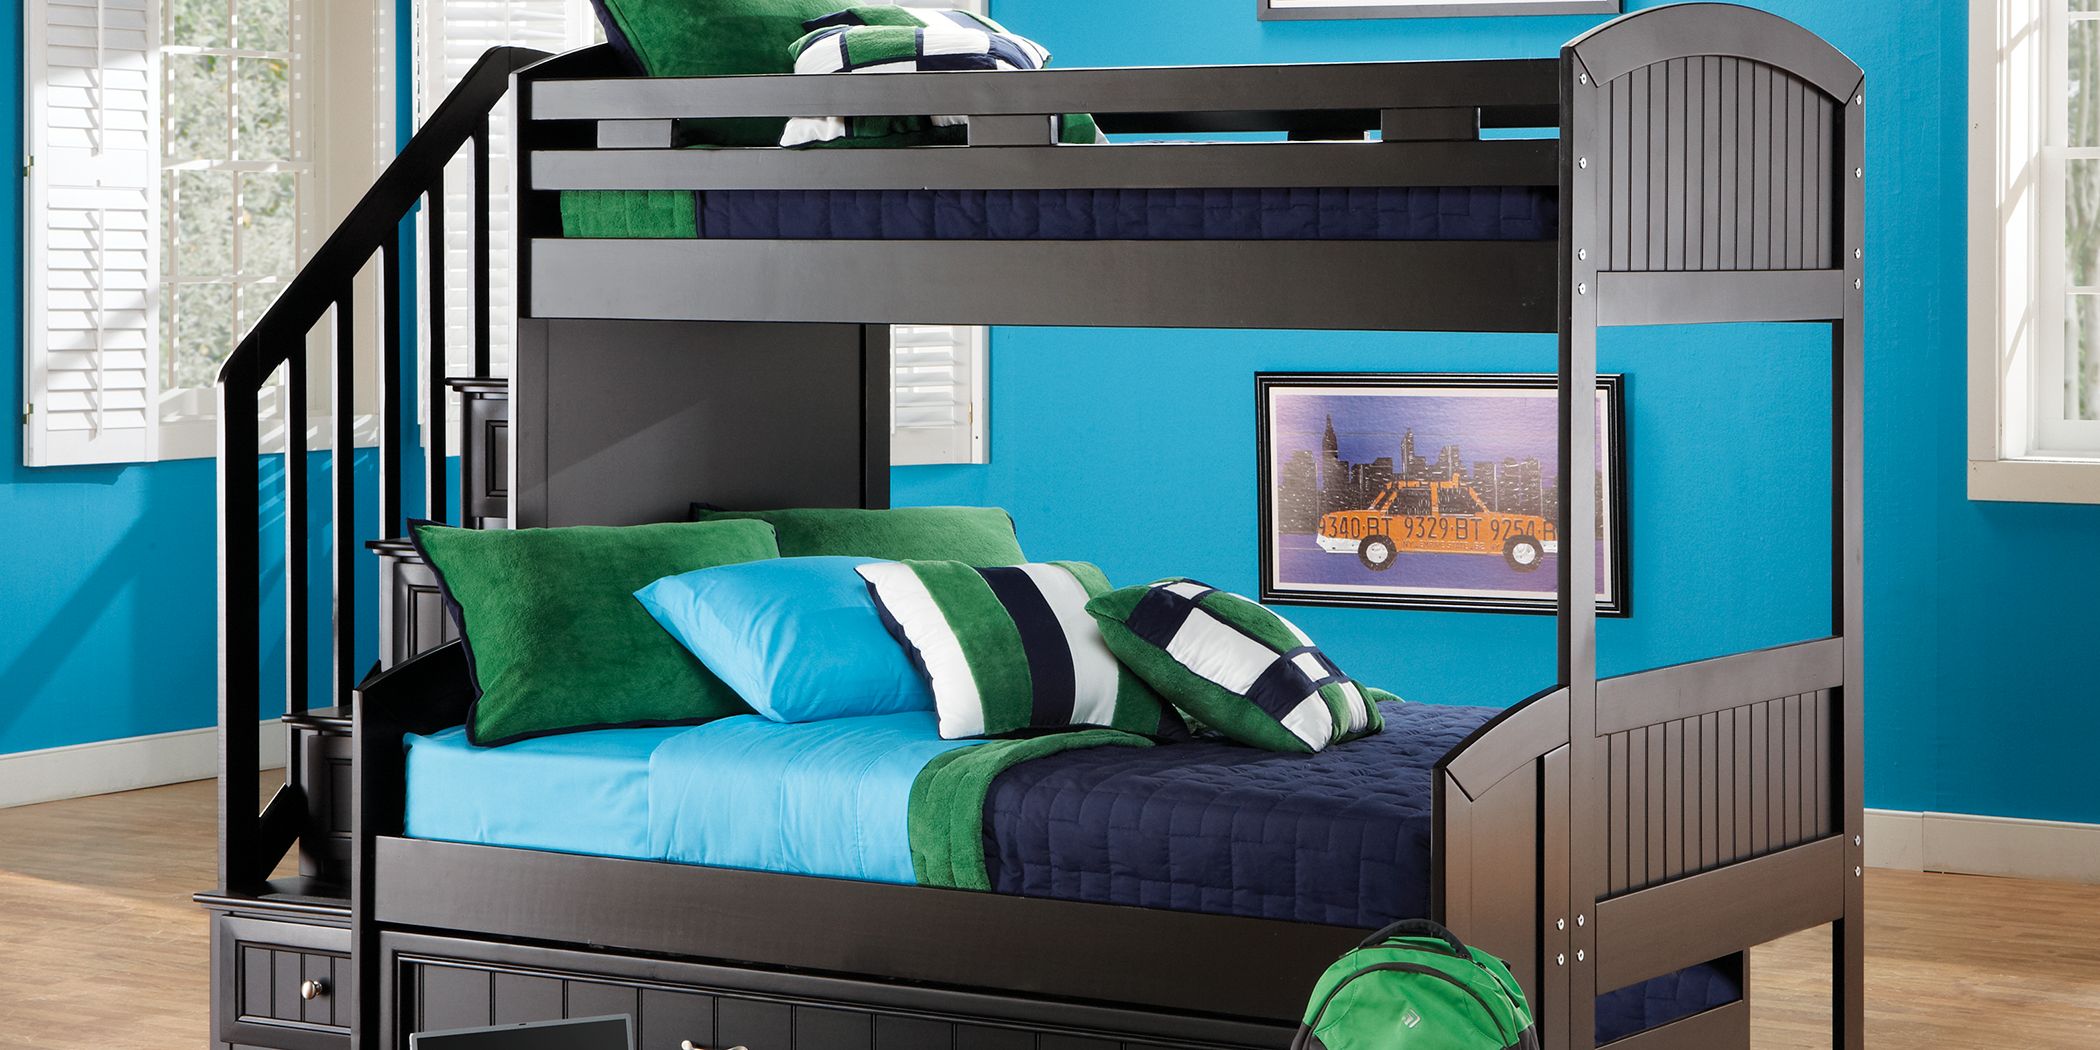 Twin Step Bunk Bed Rooms, Rooms To Go Cottage Colors Bunk Bed Reviews